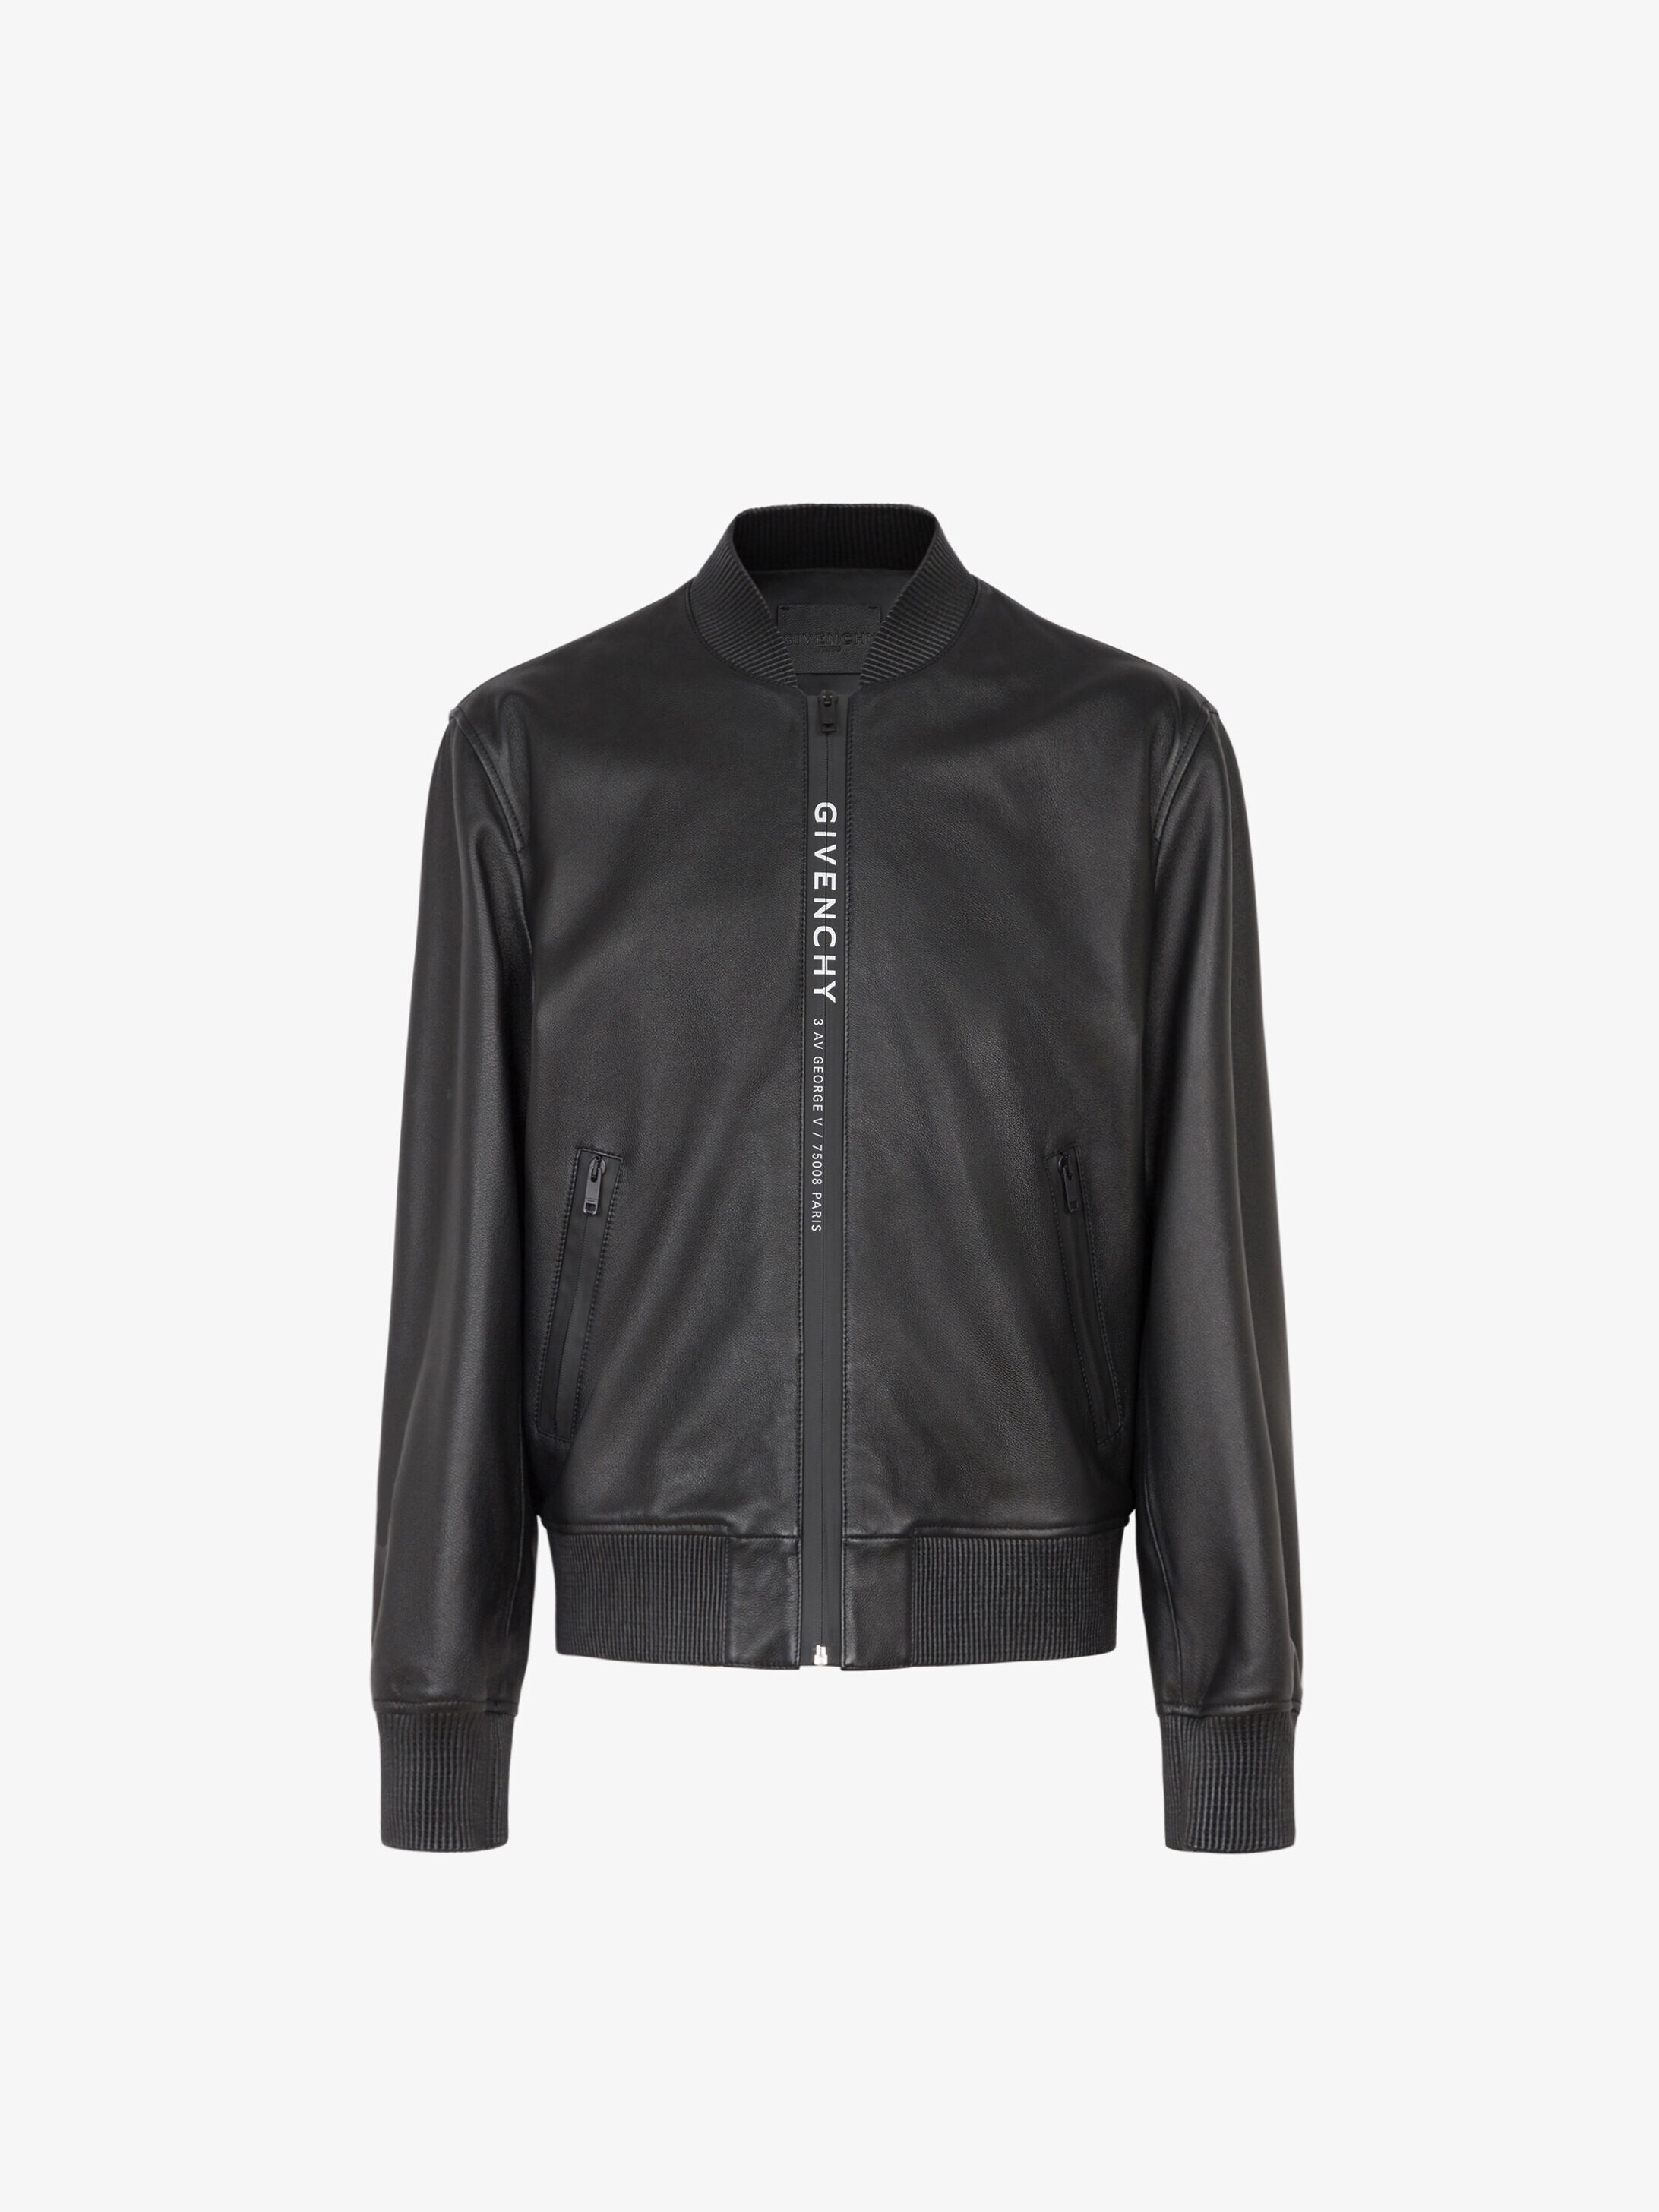 GIVENCHY bomber in leather | GIVENCHY Paris